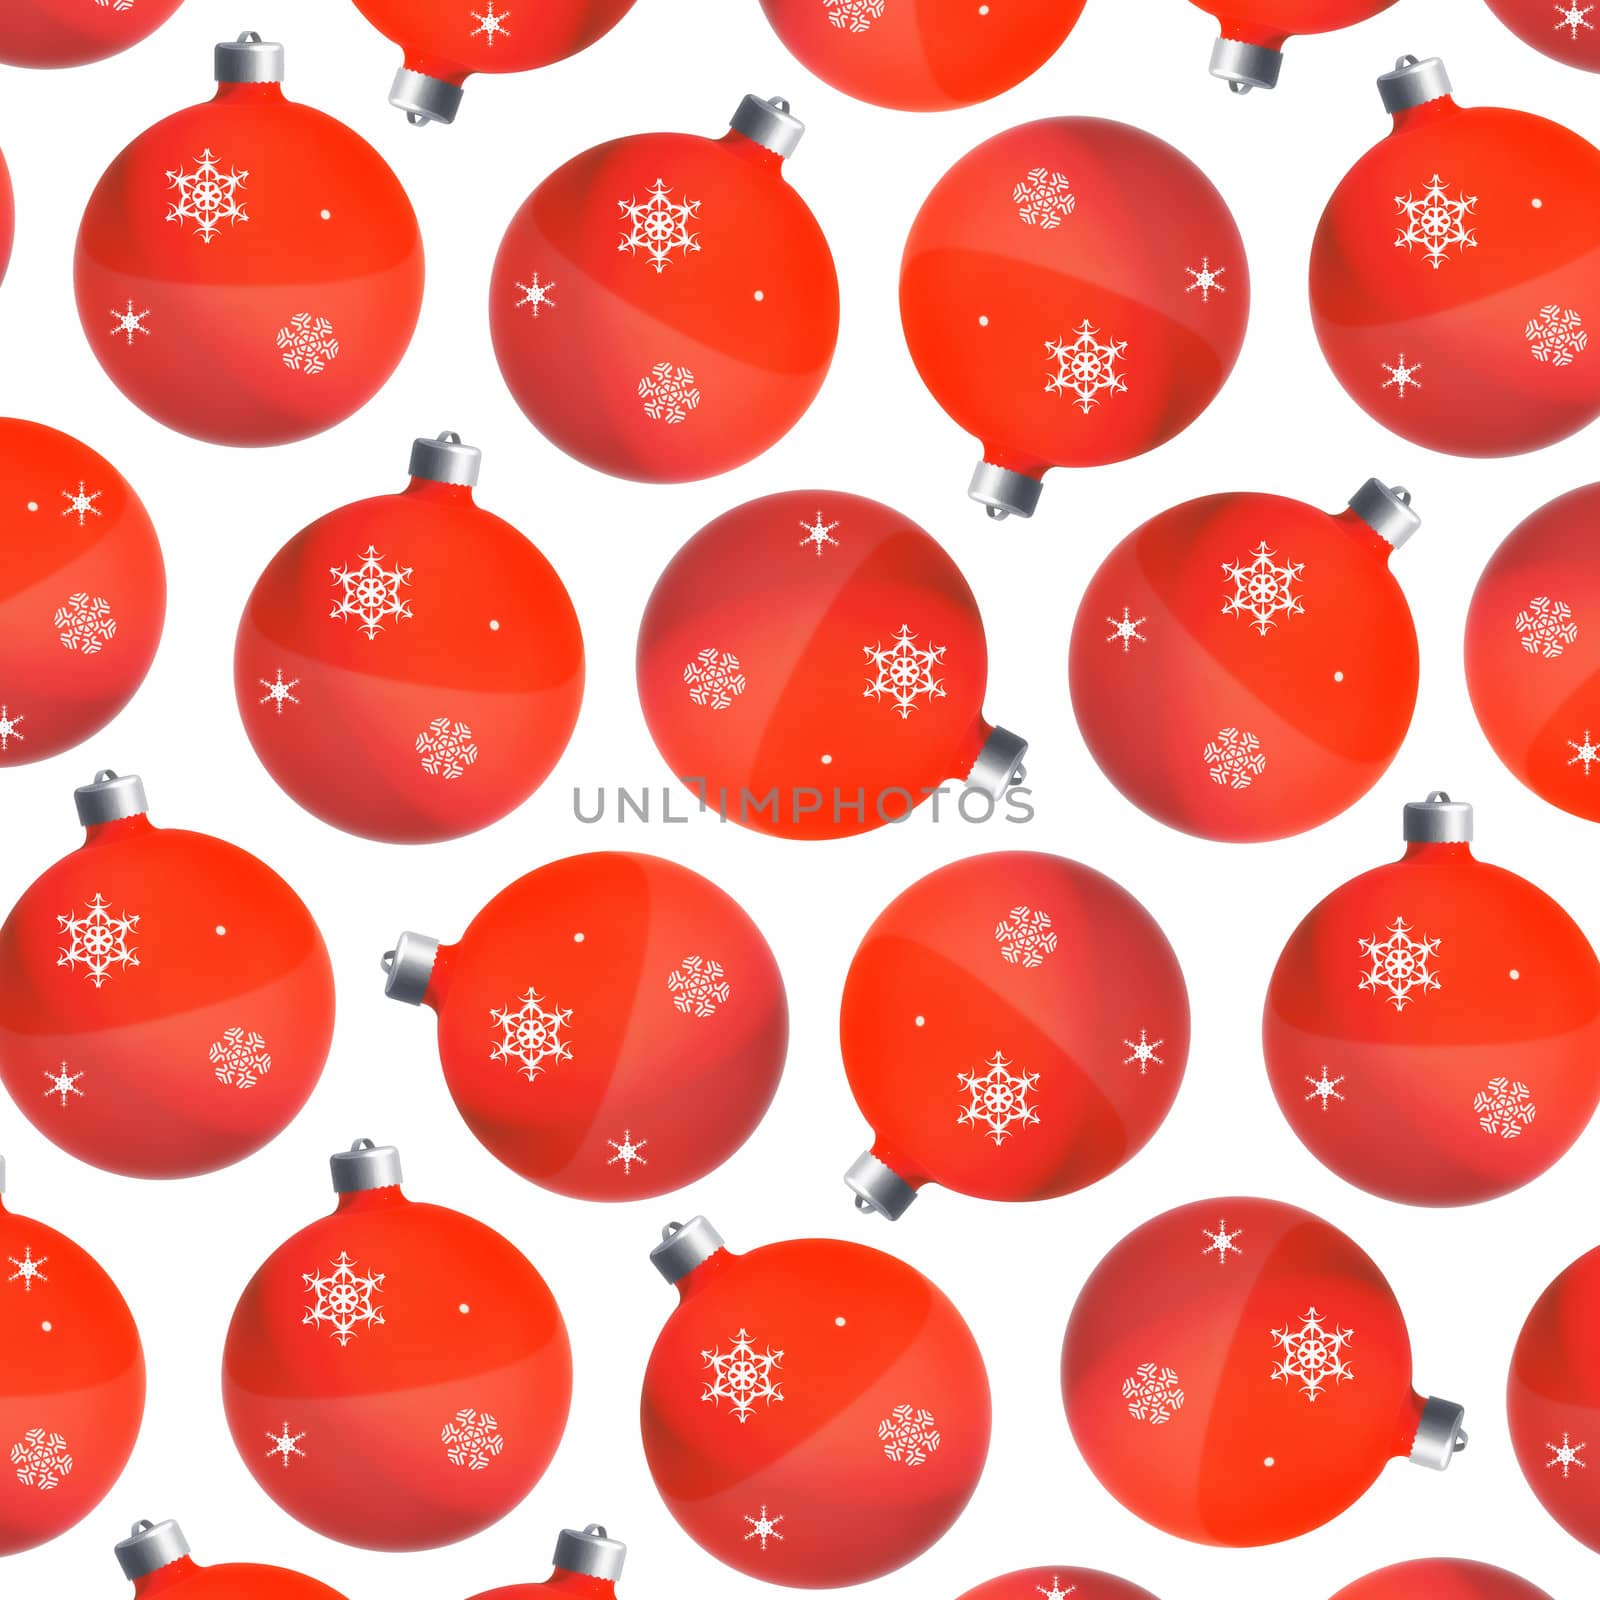 Red-colored Christmas / New Year's ornaments isolated on white